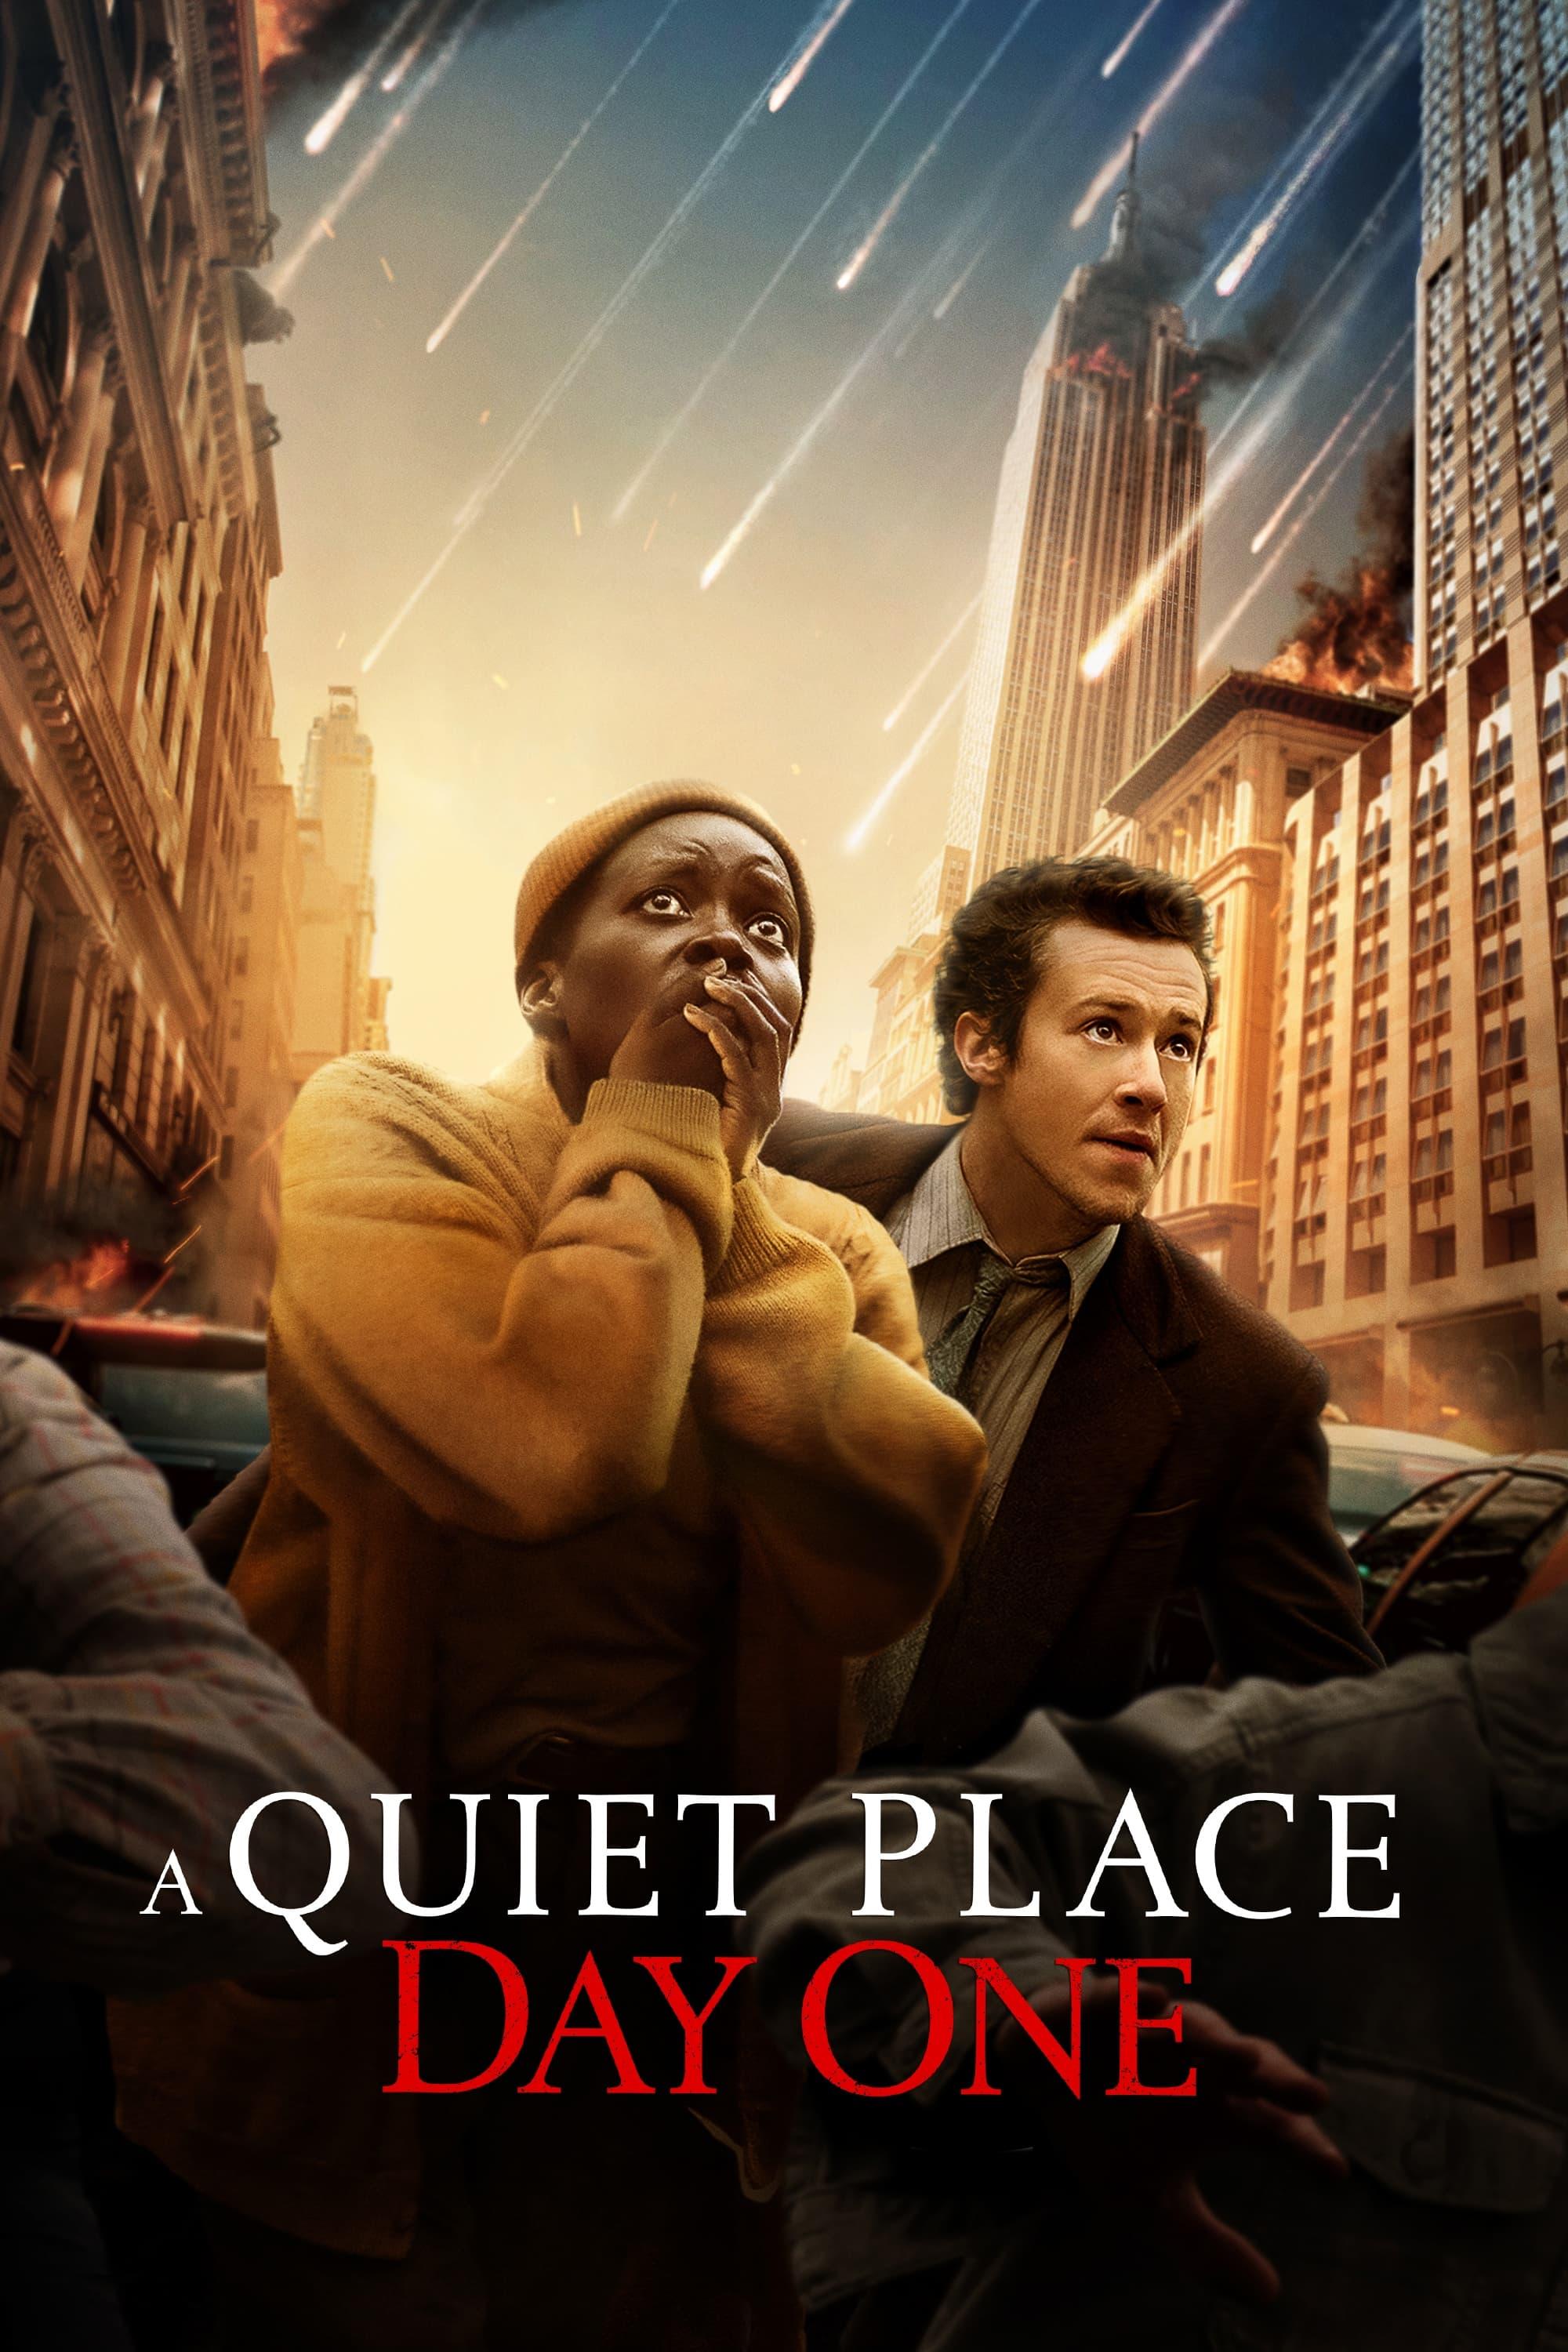 Movie poster of "A Quiet Place: Day One"